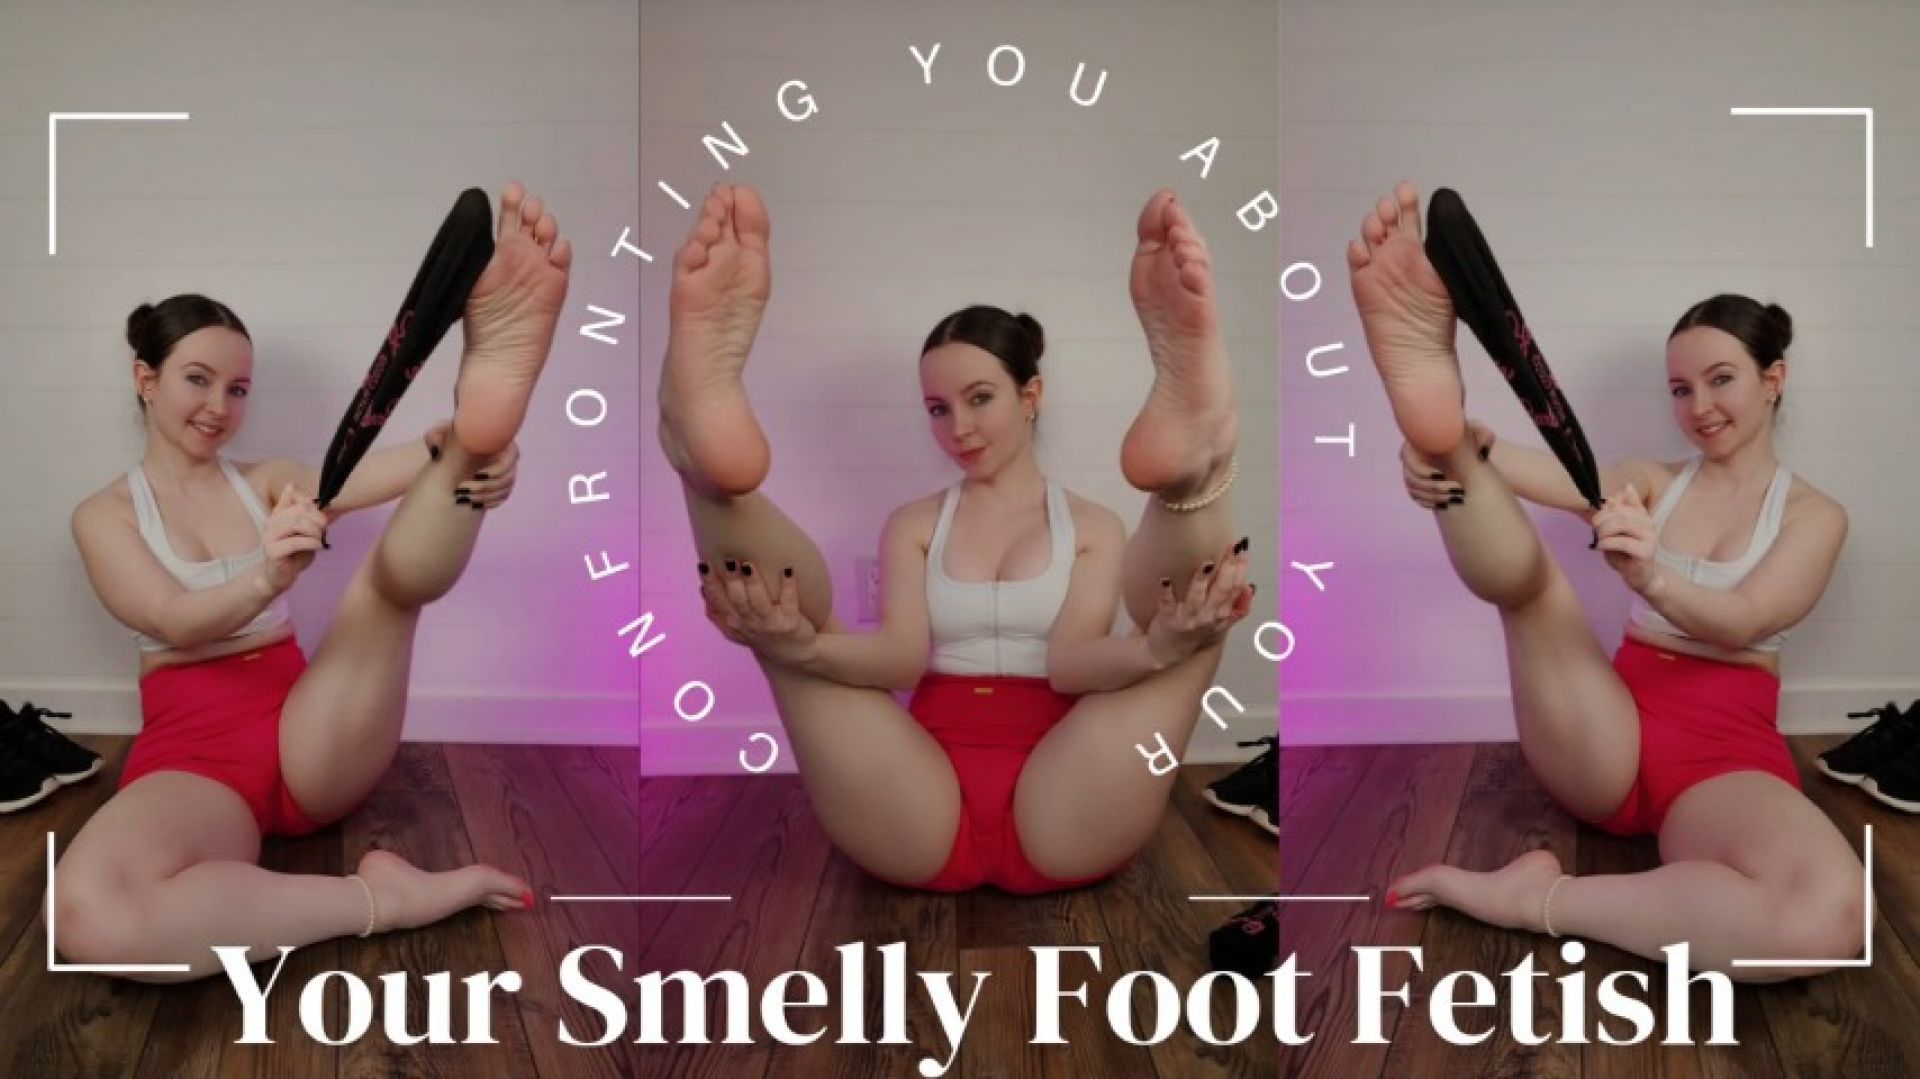 Confronting You About Your Smelly Foot Fetish